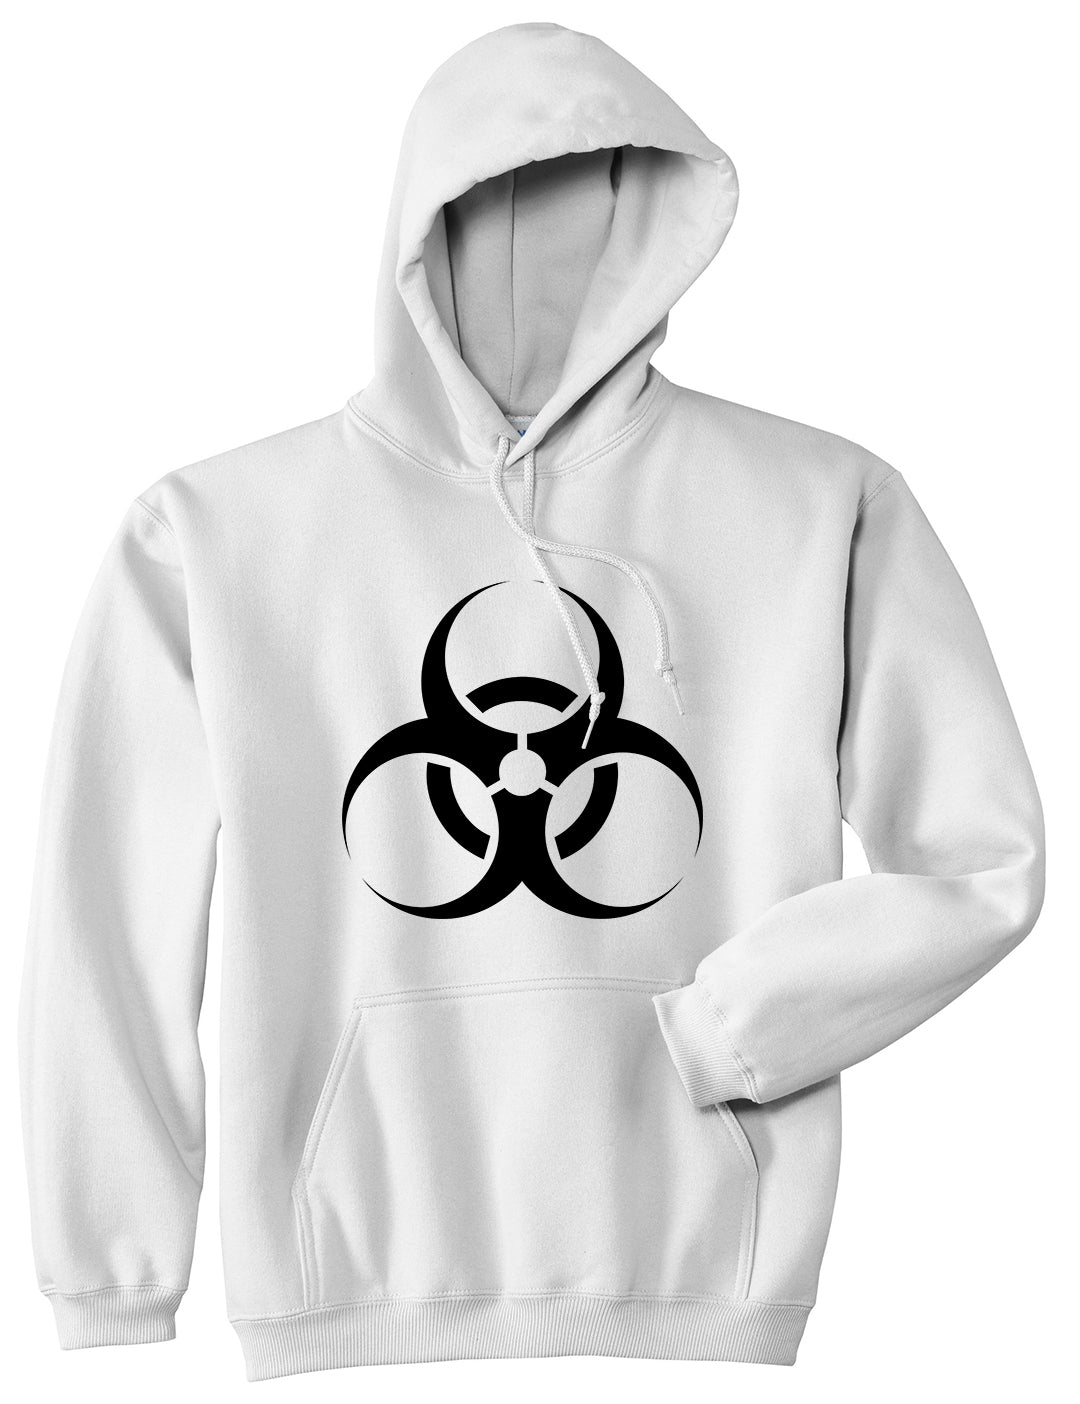 Biohazard Symbol White Pullover Hoodie by Kings Of NY